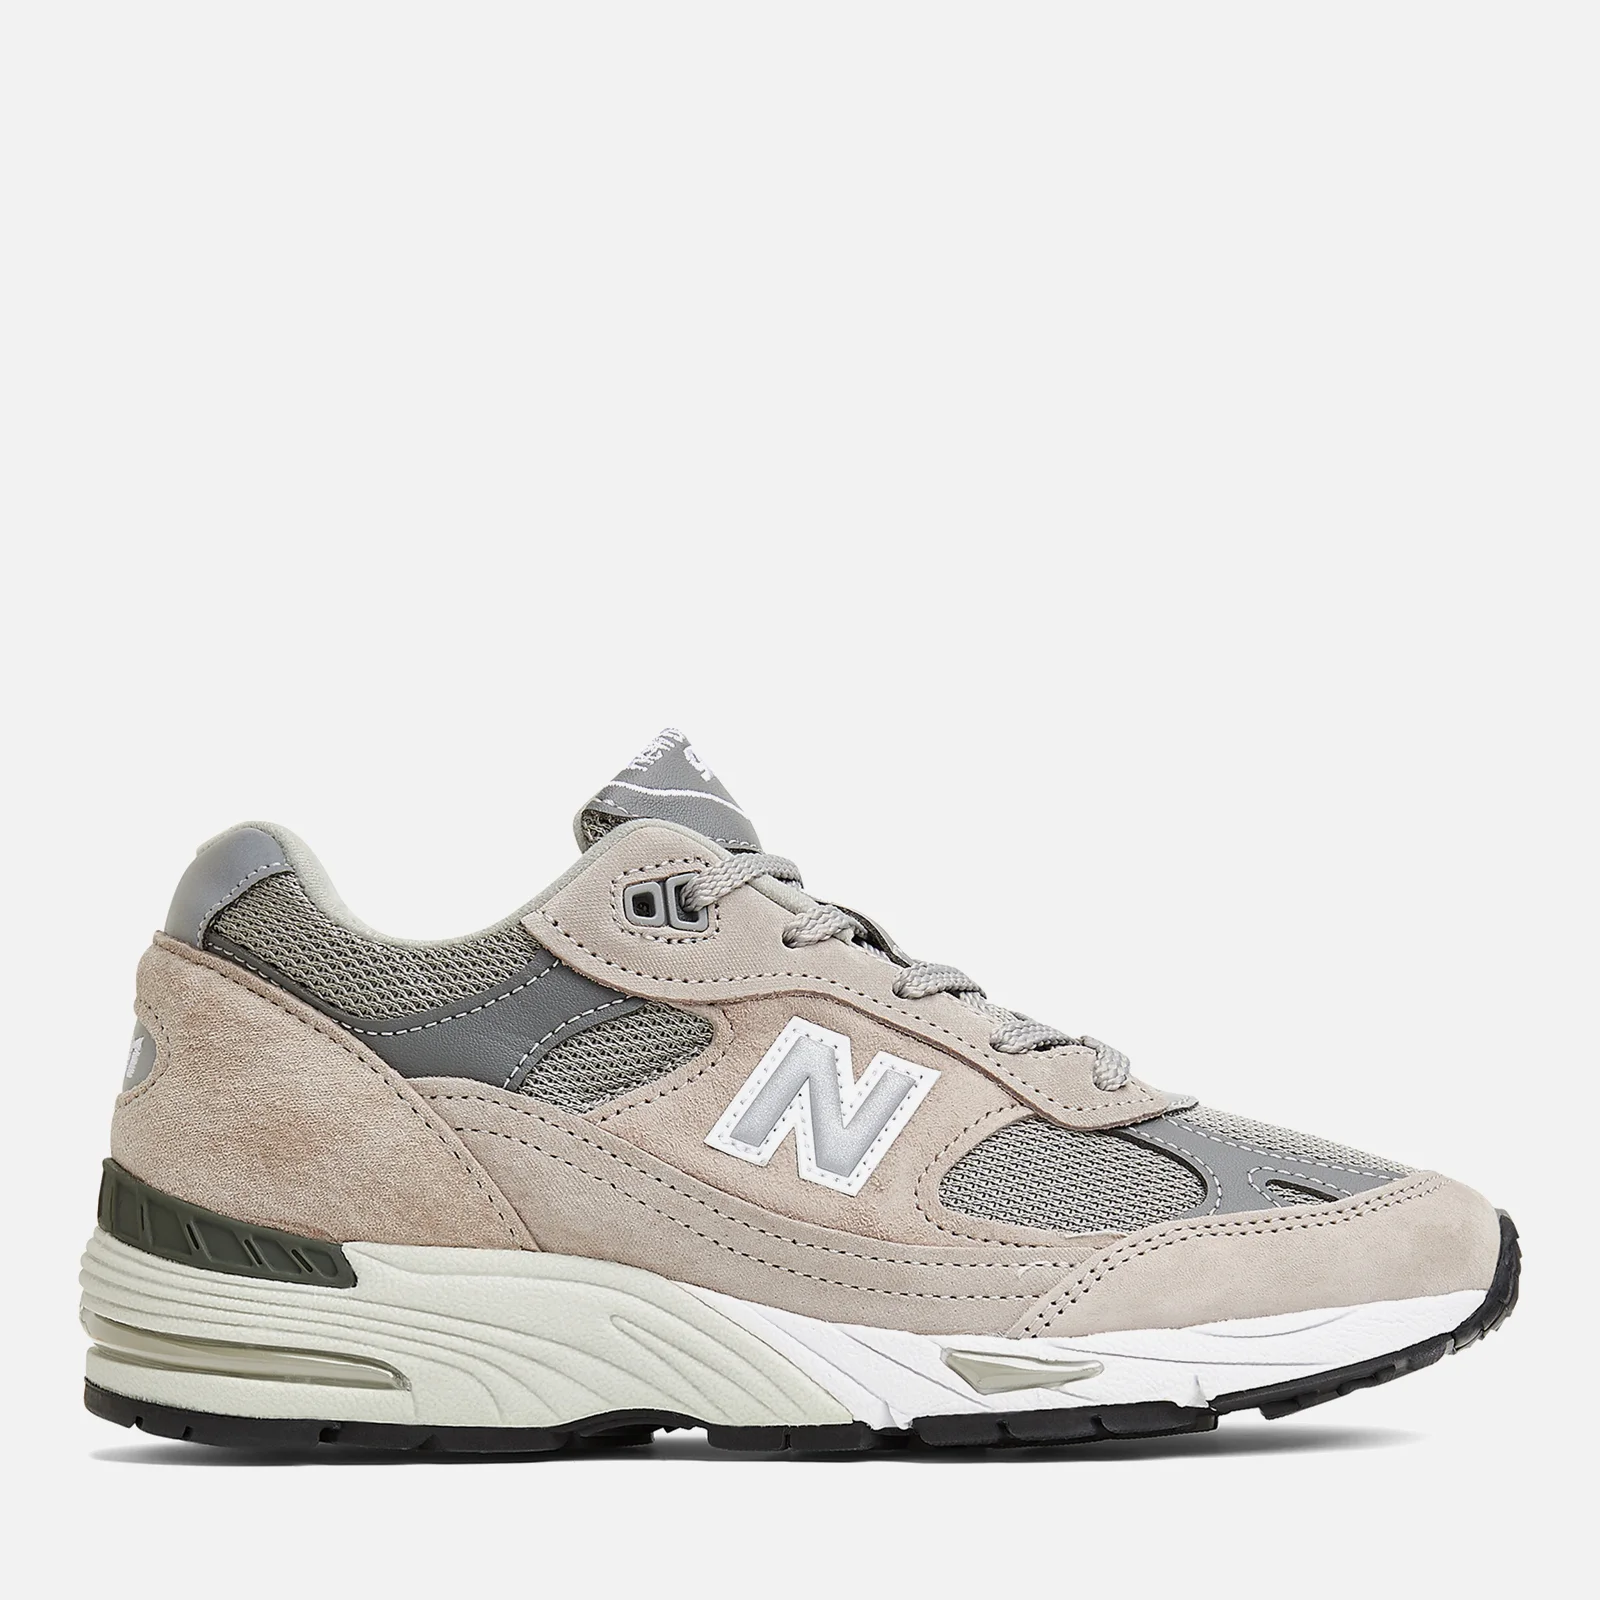 New Balance Womens's Made In Uk 991 Trainers - Grey/White Image 1